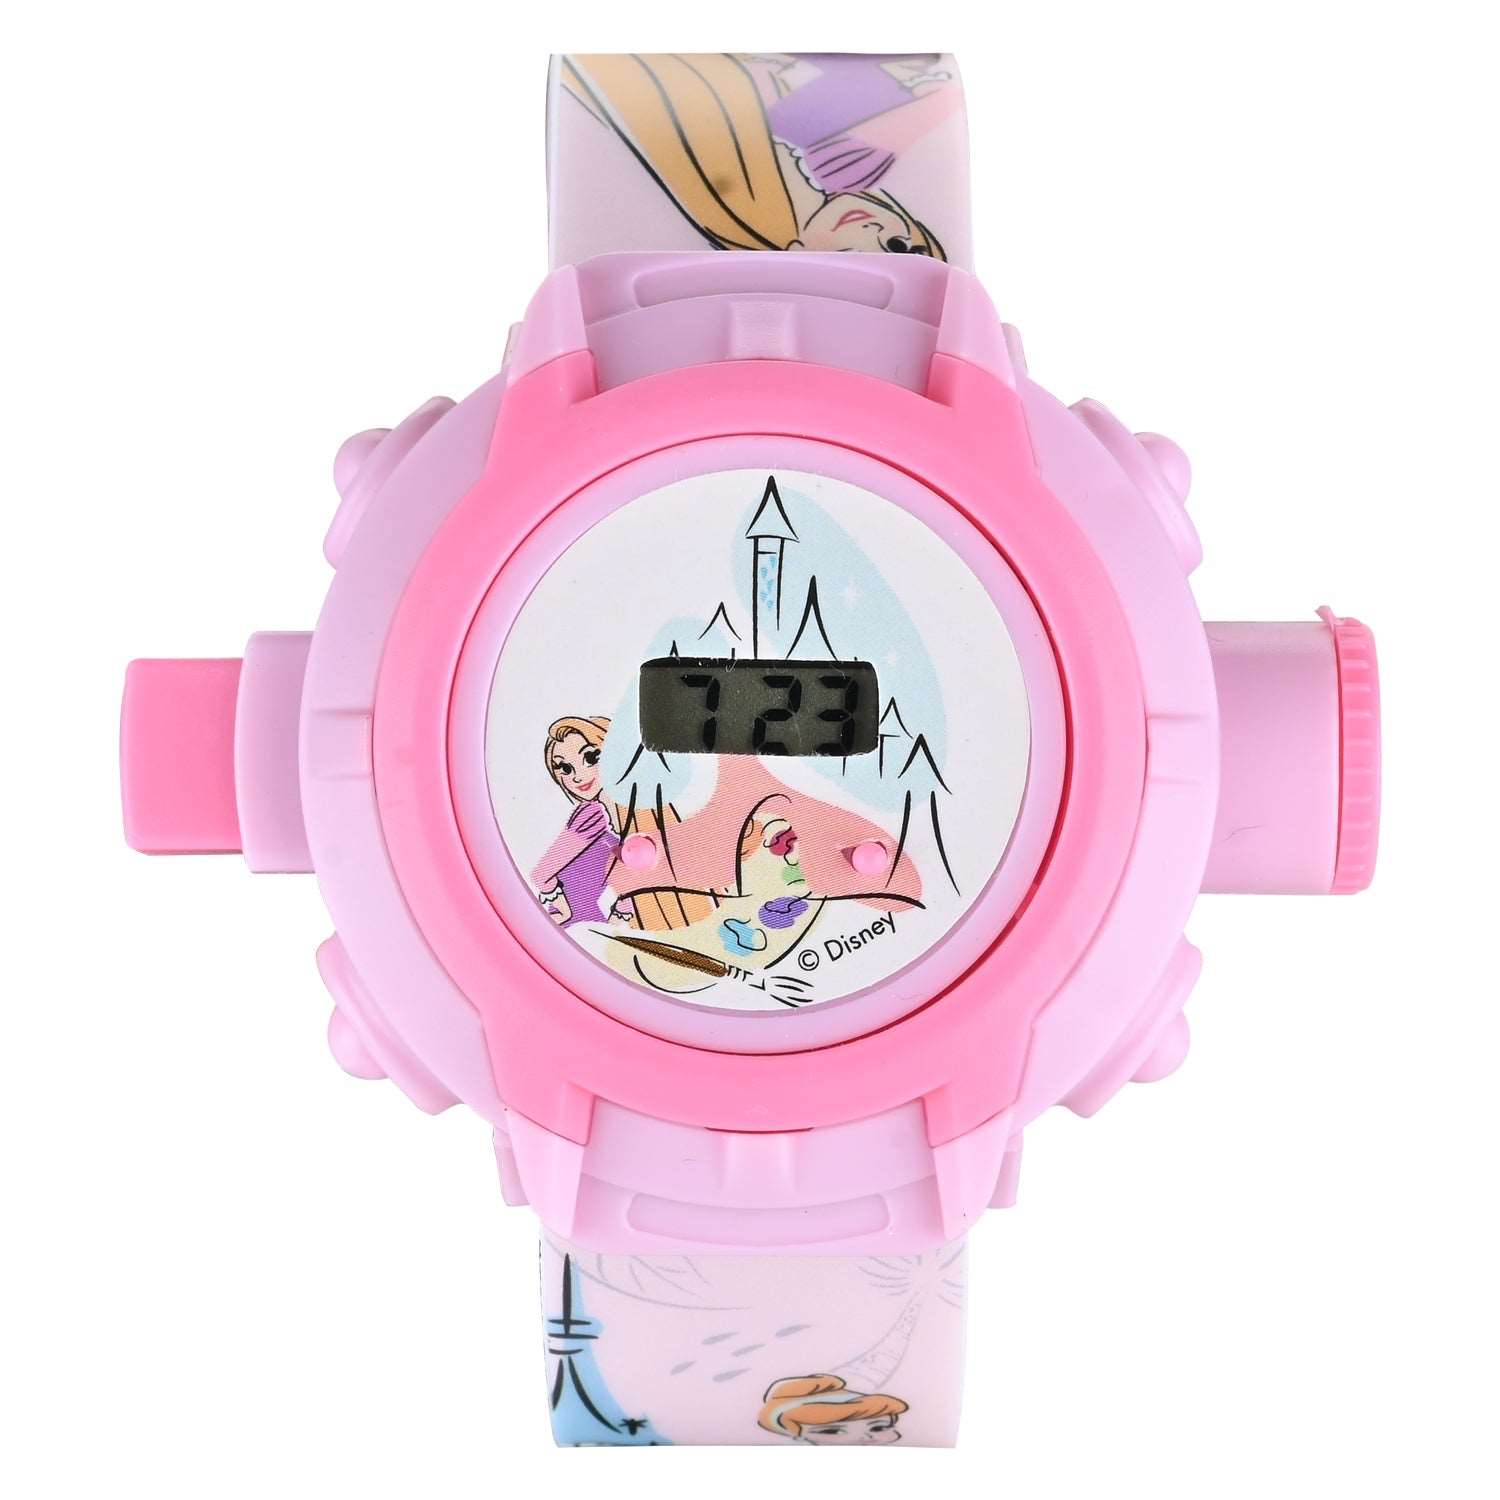 Disney Kids Princess Projector Watch - Toys4All.in